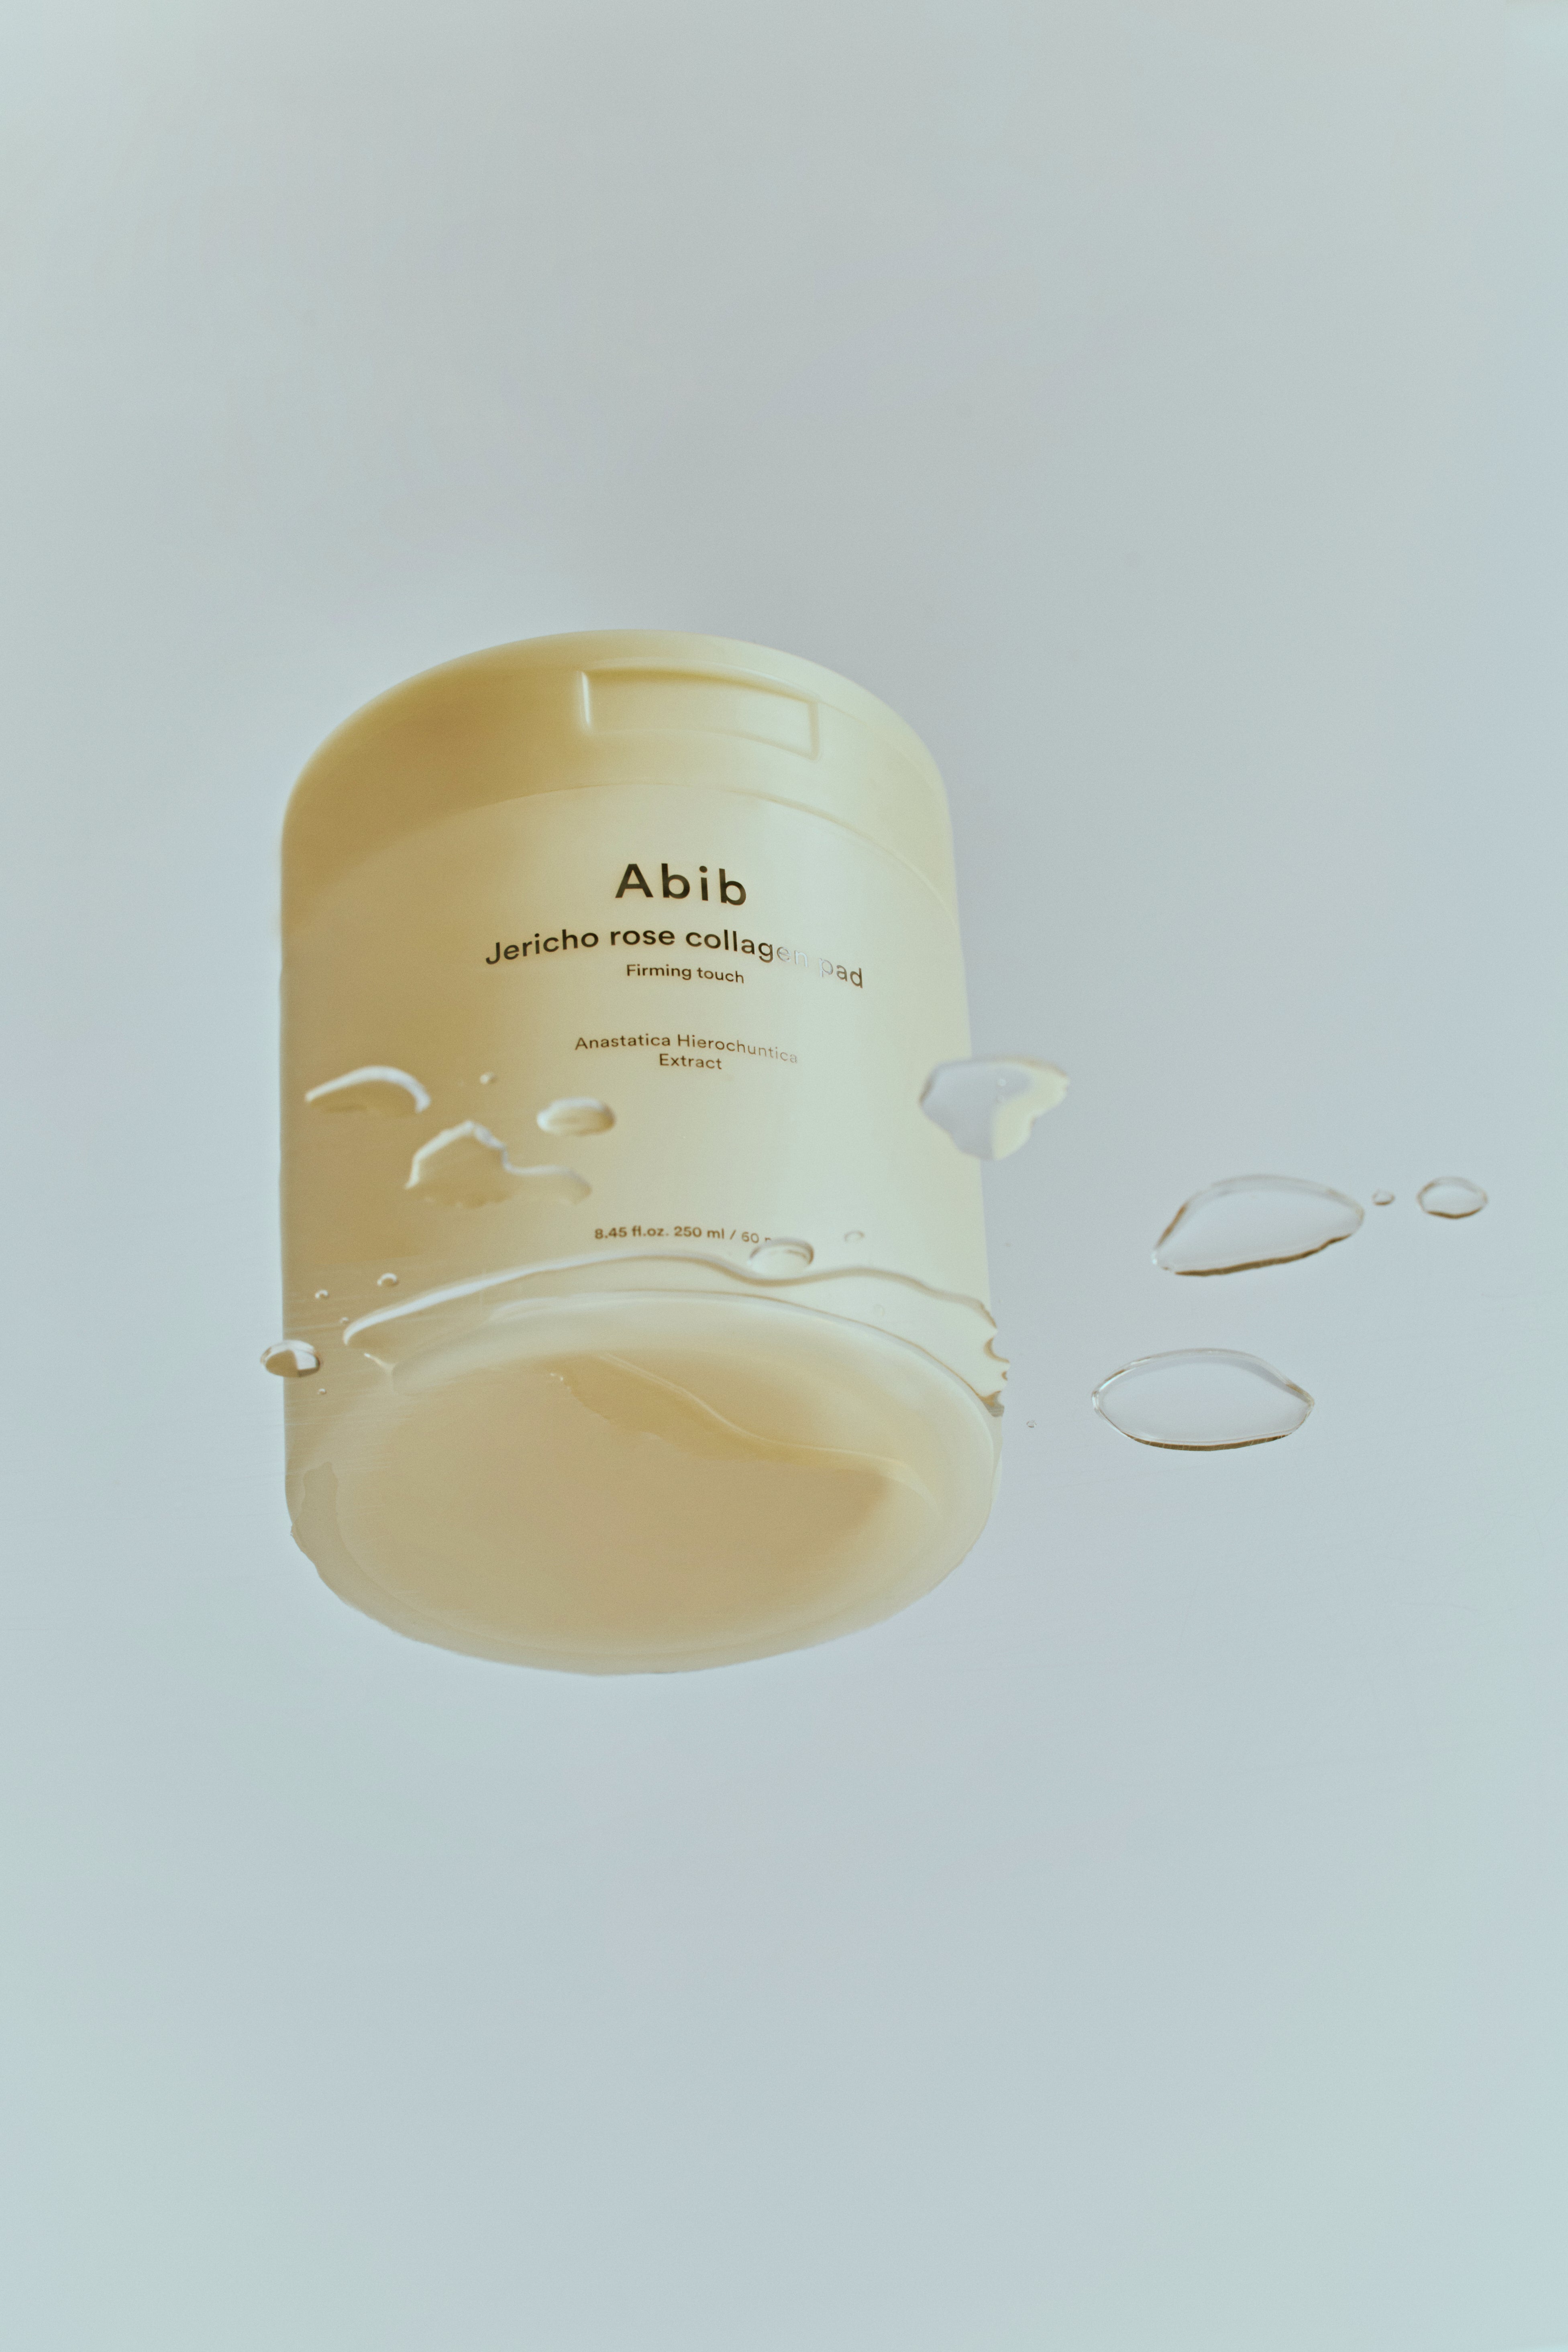 Abib Jericho rose collagen pad Firming touch 60 Pads